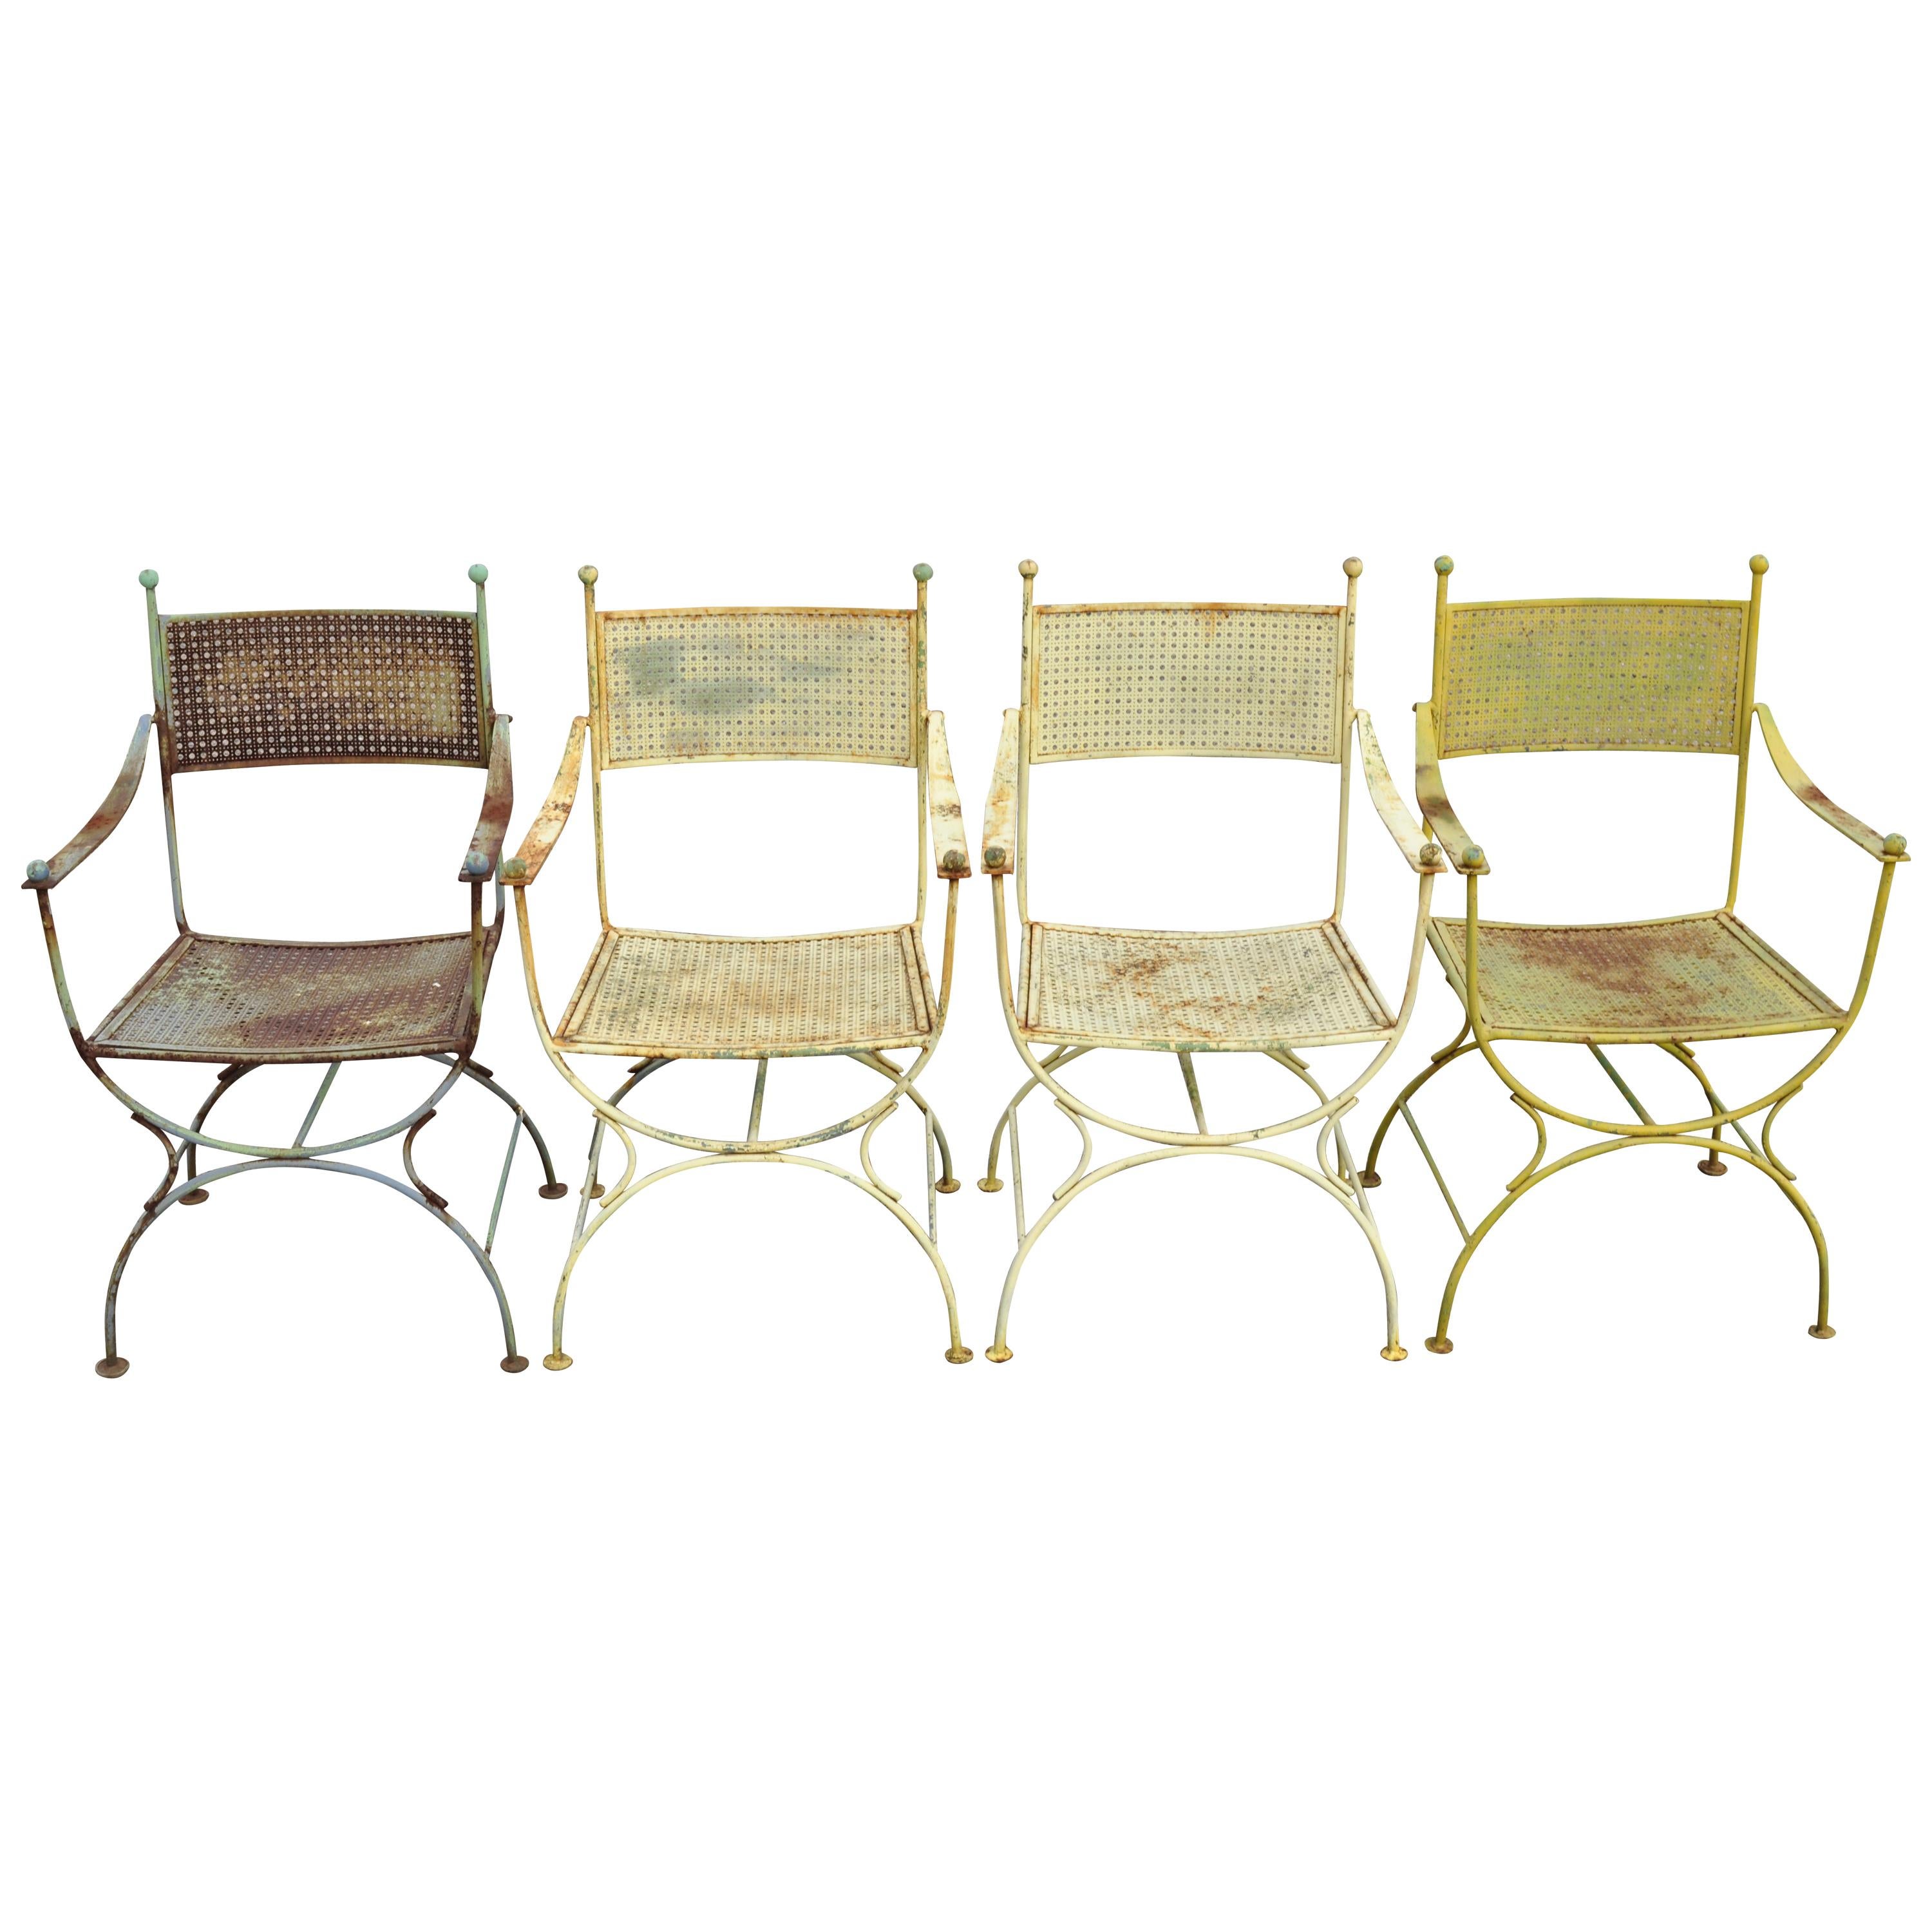 Set of 4 Vintage Wrought Iron Curule X-Frame Garden Patio Dining Armchairs